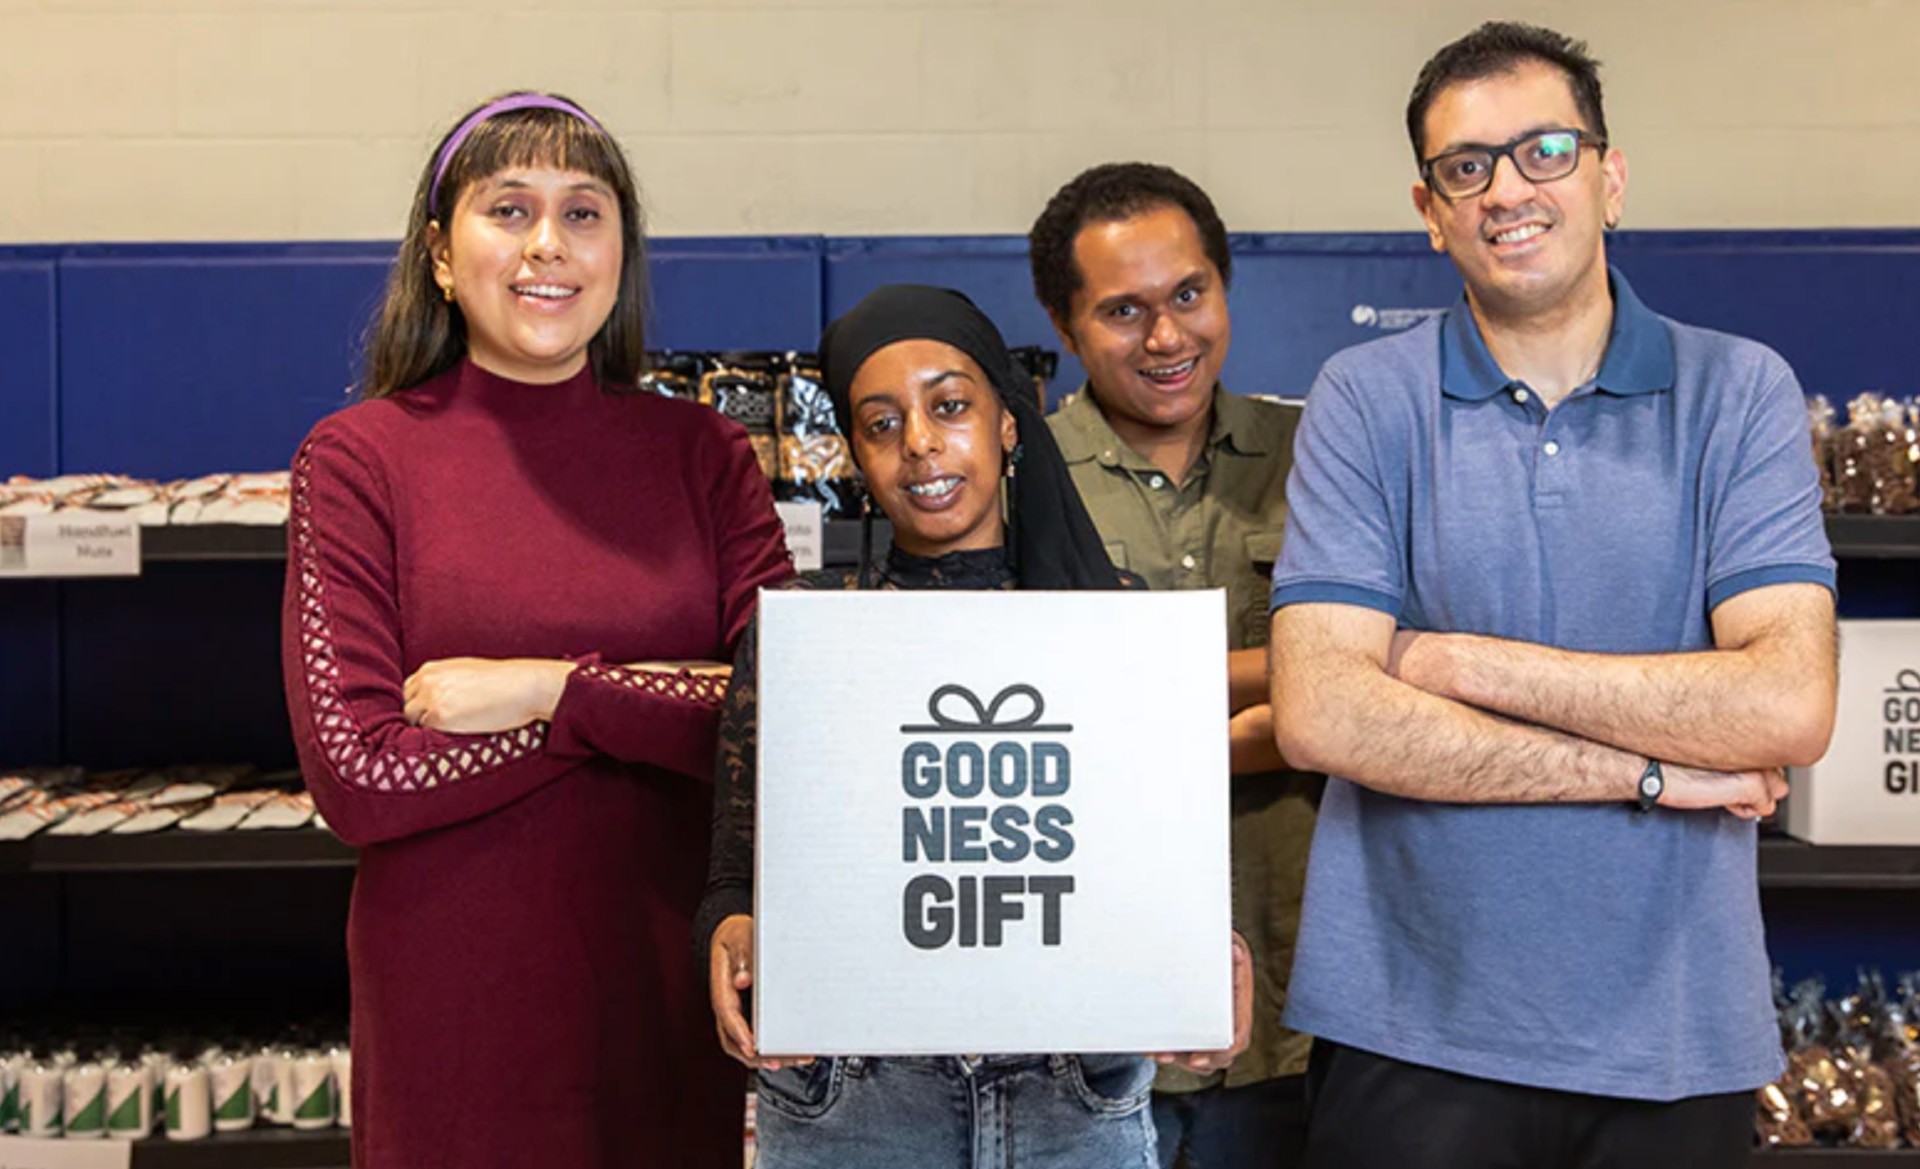 A group of 4 workers from the Goodness Gift social enterprise holding a gift box and smiling